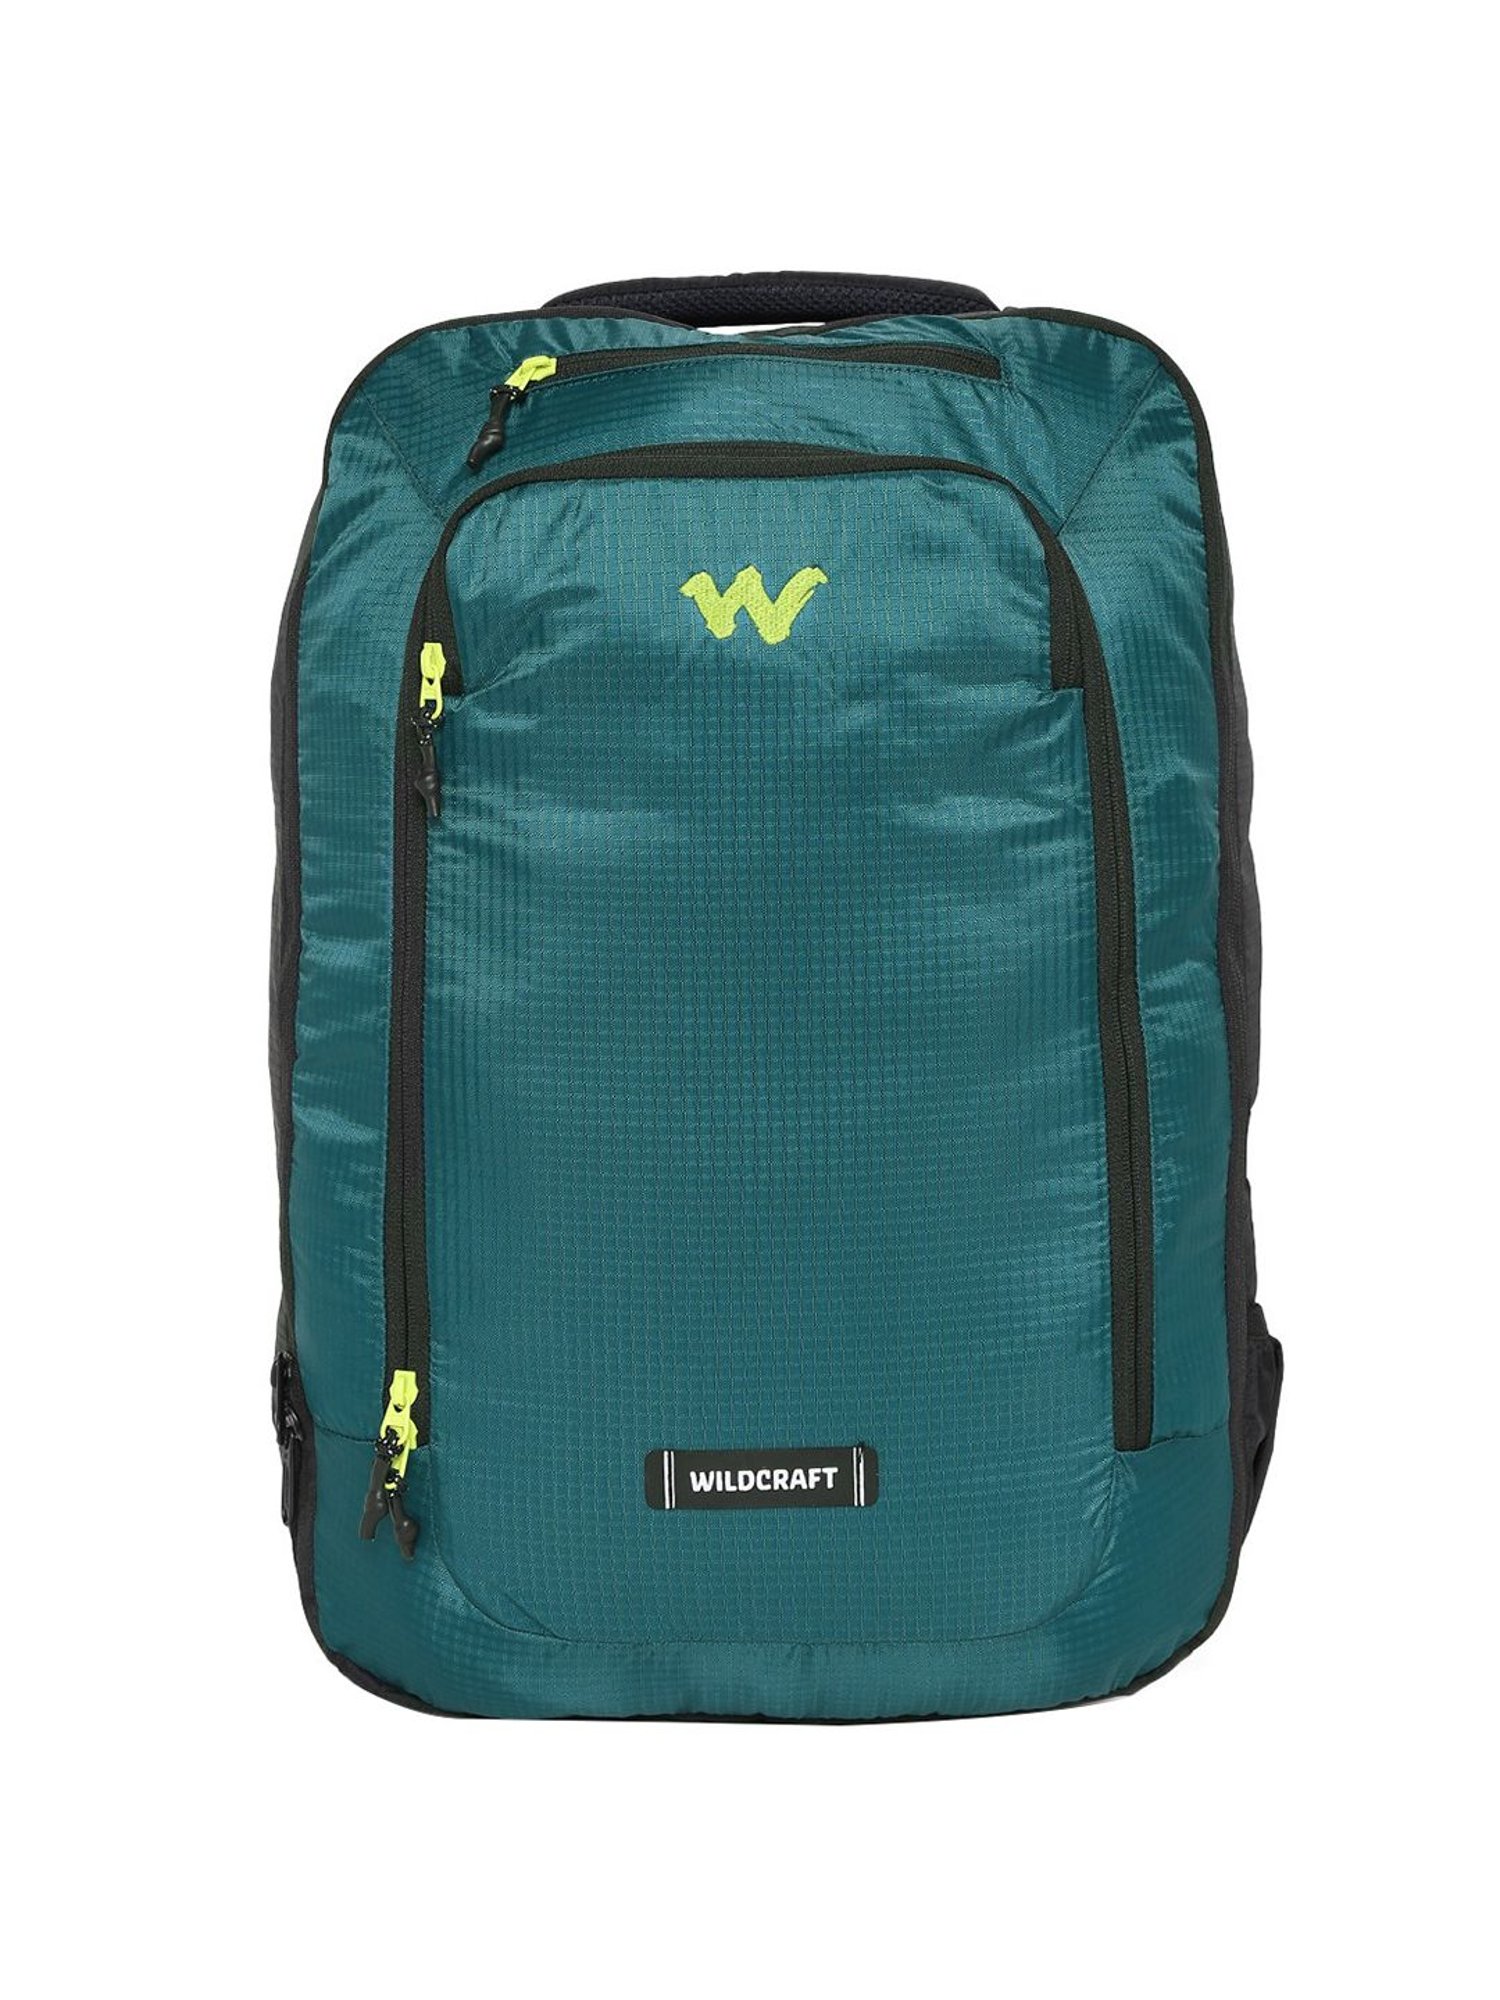 Buy WILDCRAFT Unisex 3 Compartment Zipper Closure Backpack | Shoppers Stop